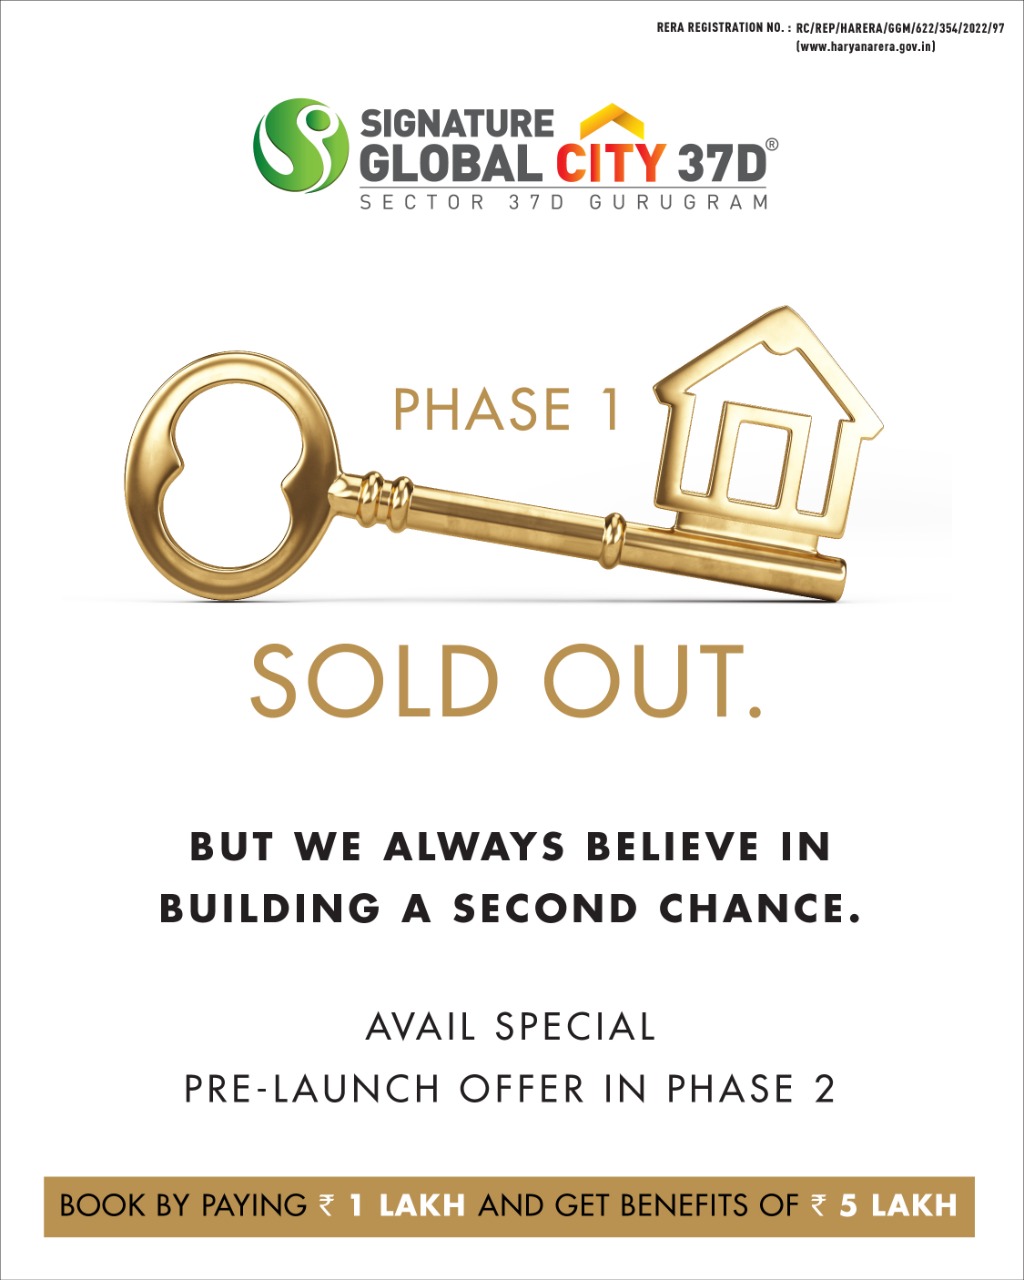 Phase 1 sold out at Signature Global City 37D, Gurgaon